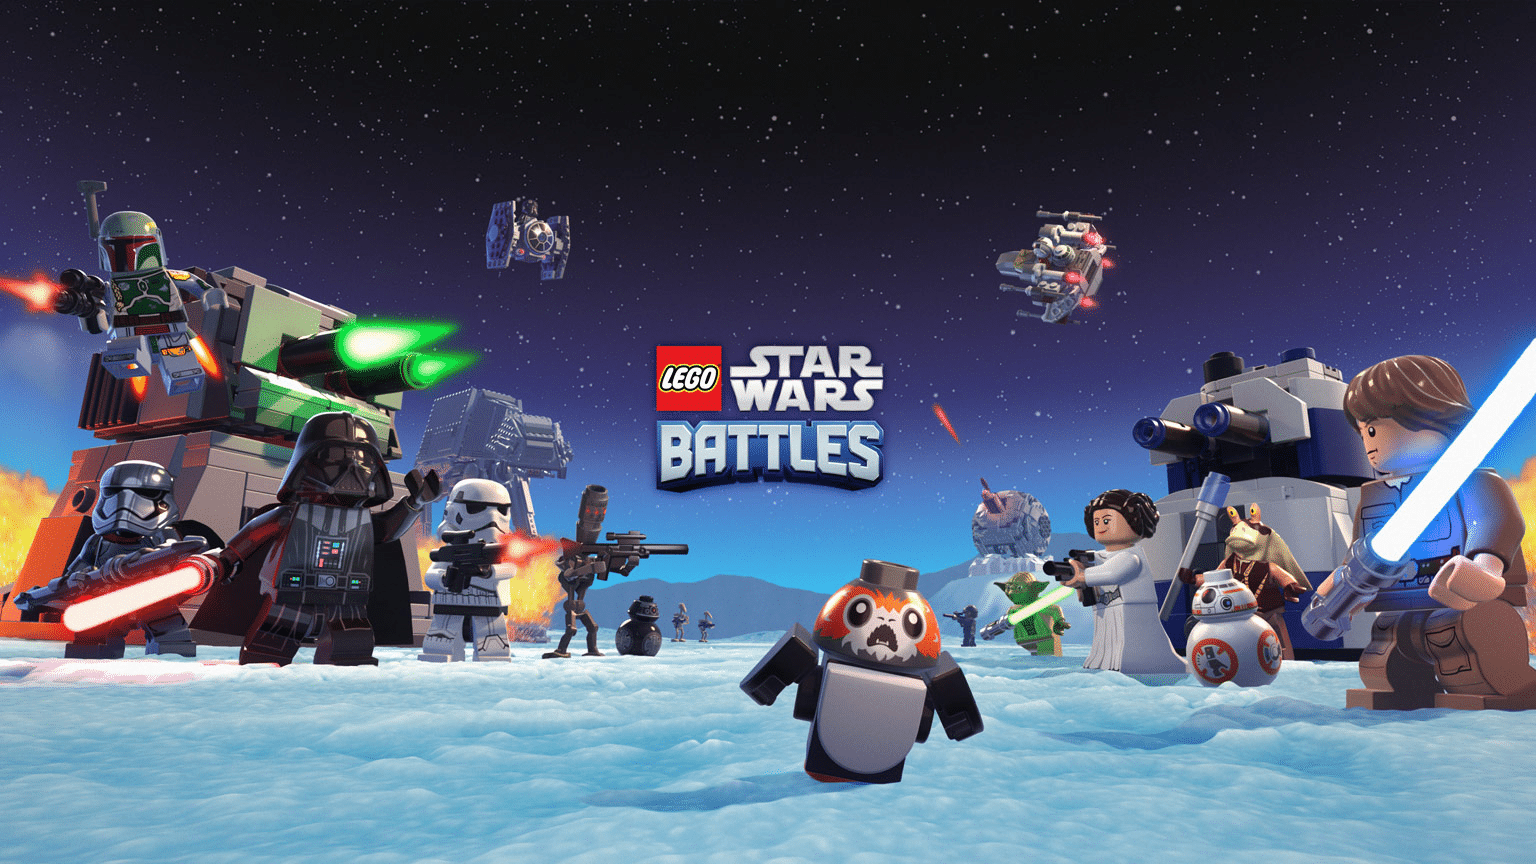 Mobile Tower Defense ‘LEGO Star Wars Battles’ Launches on Apple Arcade